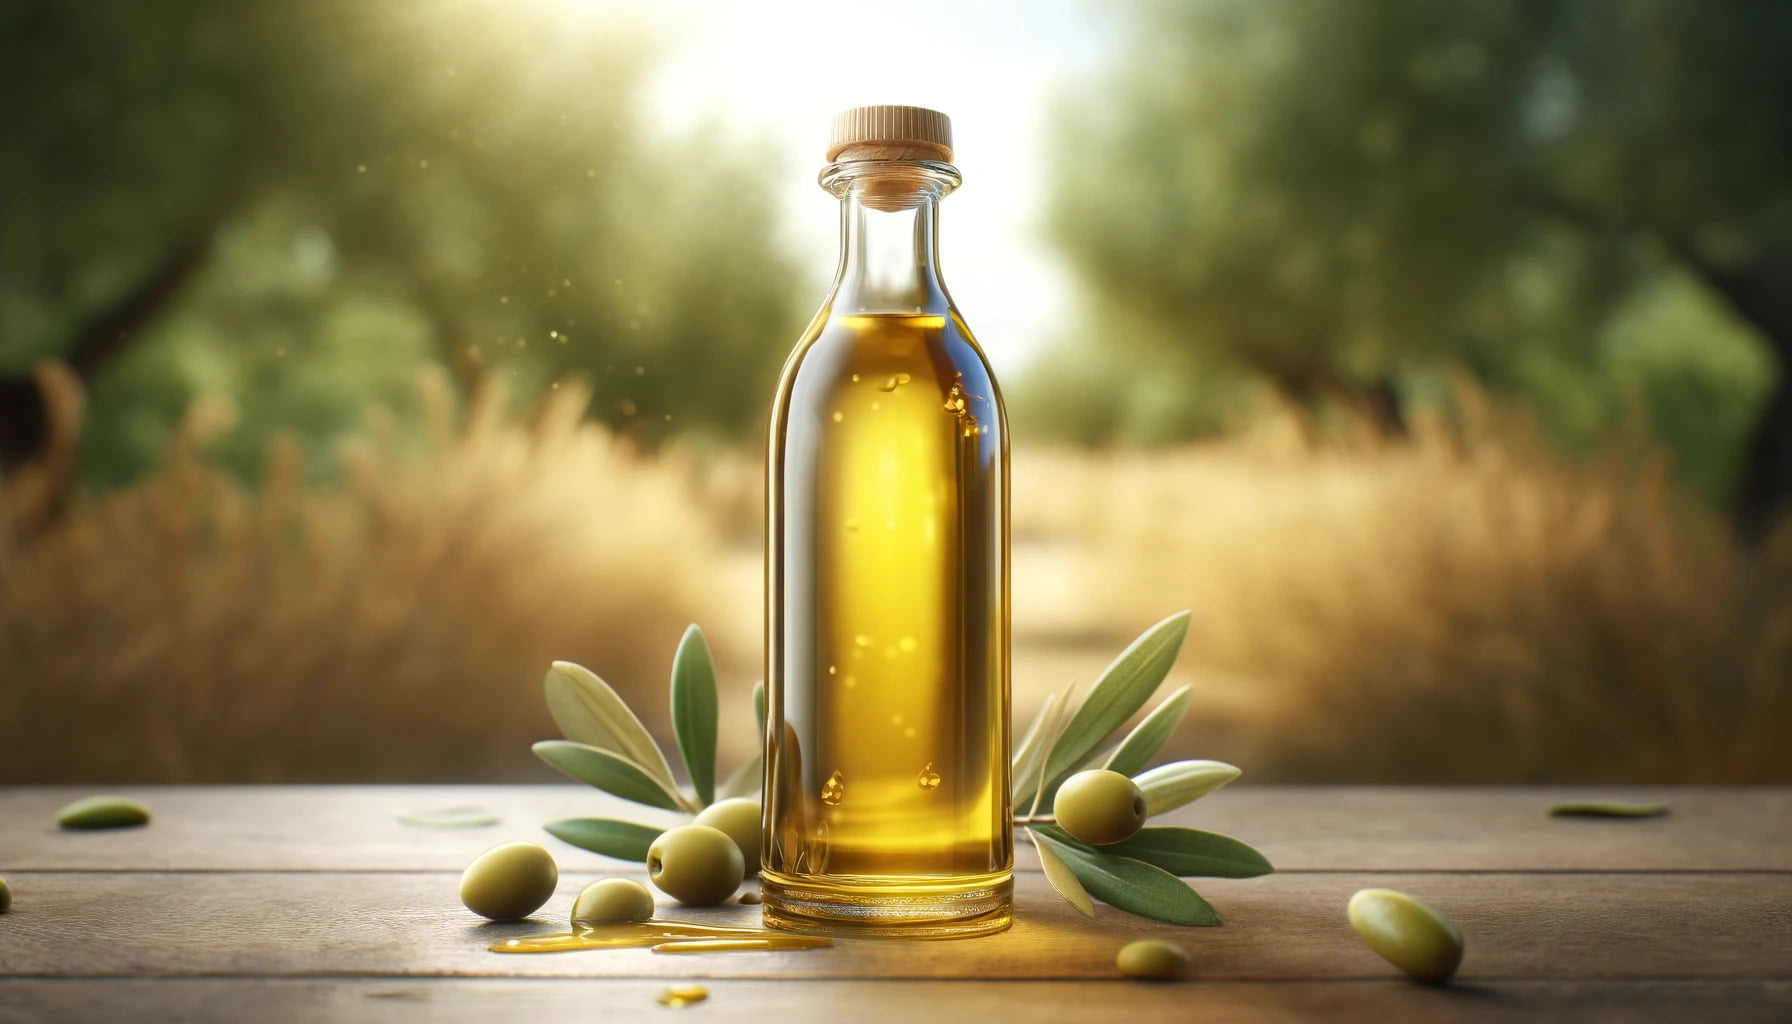 A photorealistic image of a bottle of olive oil in a landscape format. 